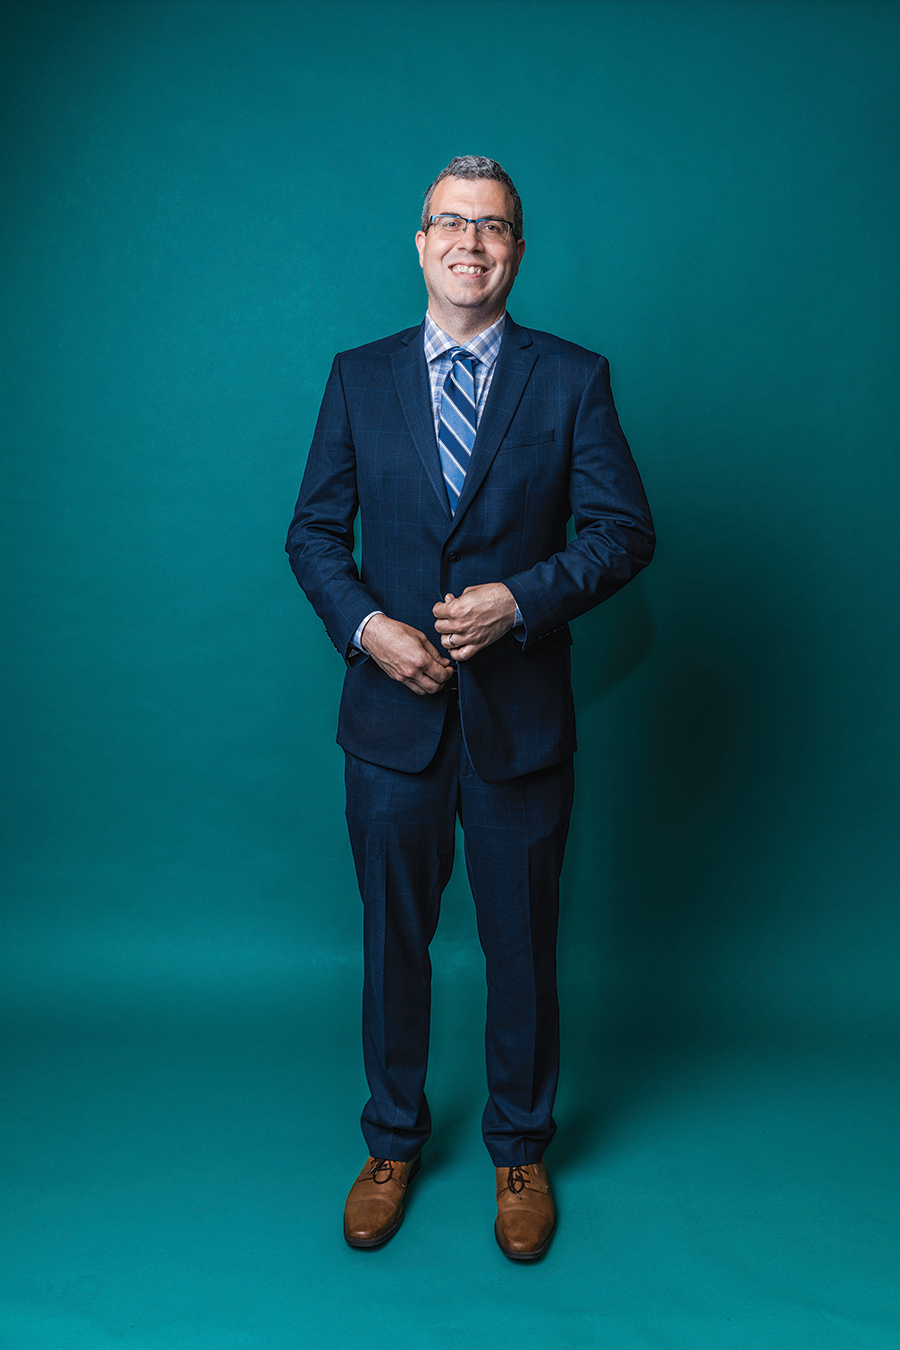 Portrait of a man in a suit and tie against a teal green backdrop.